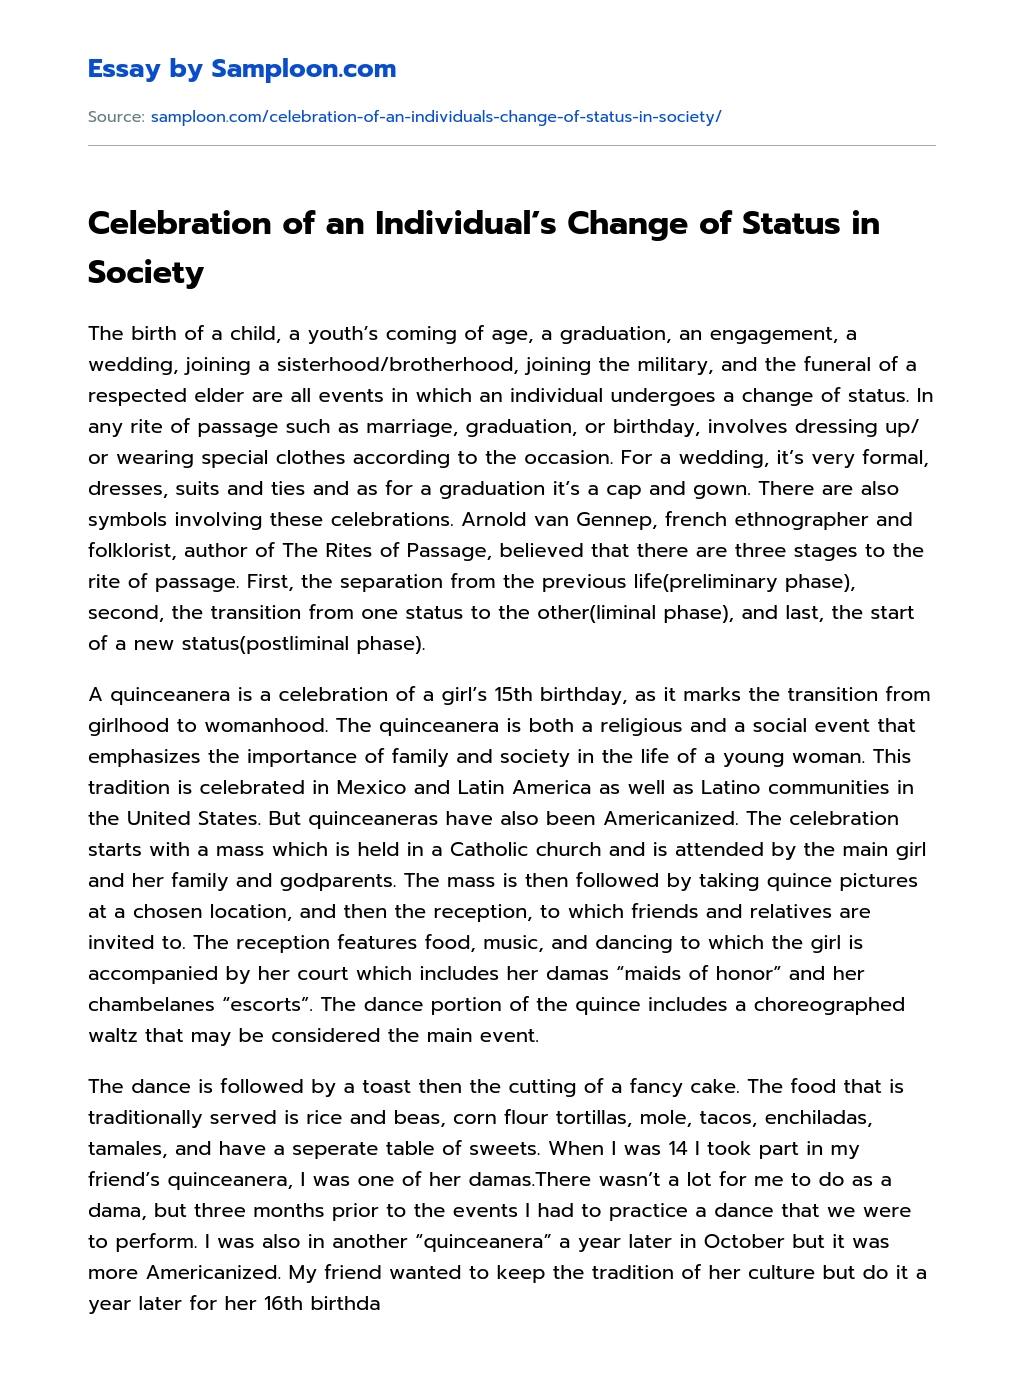 Celebration of an Individual’s Change of Status in Society essay